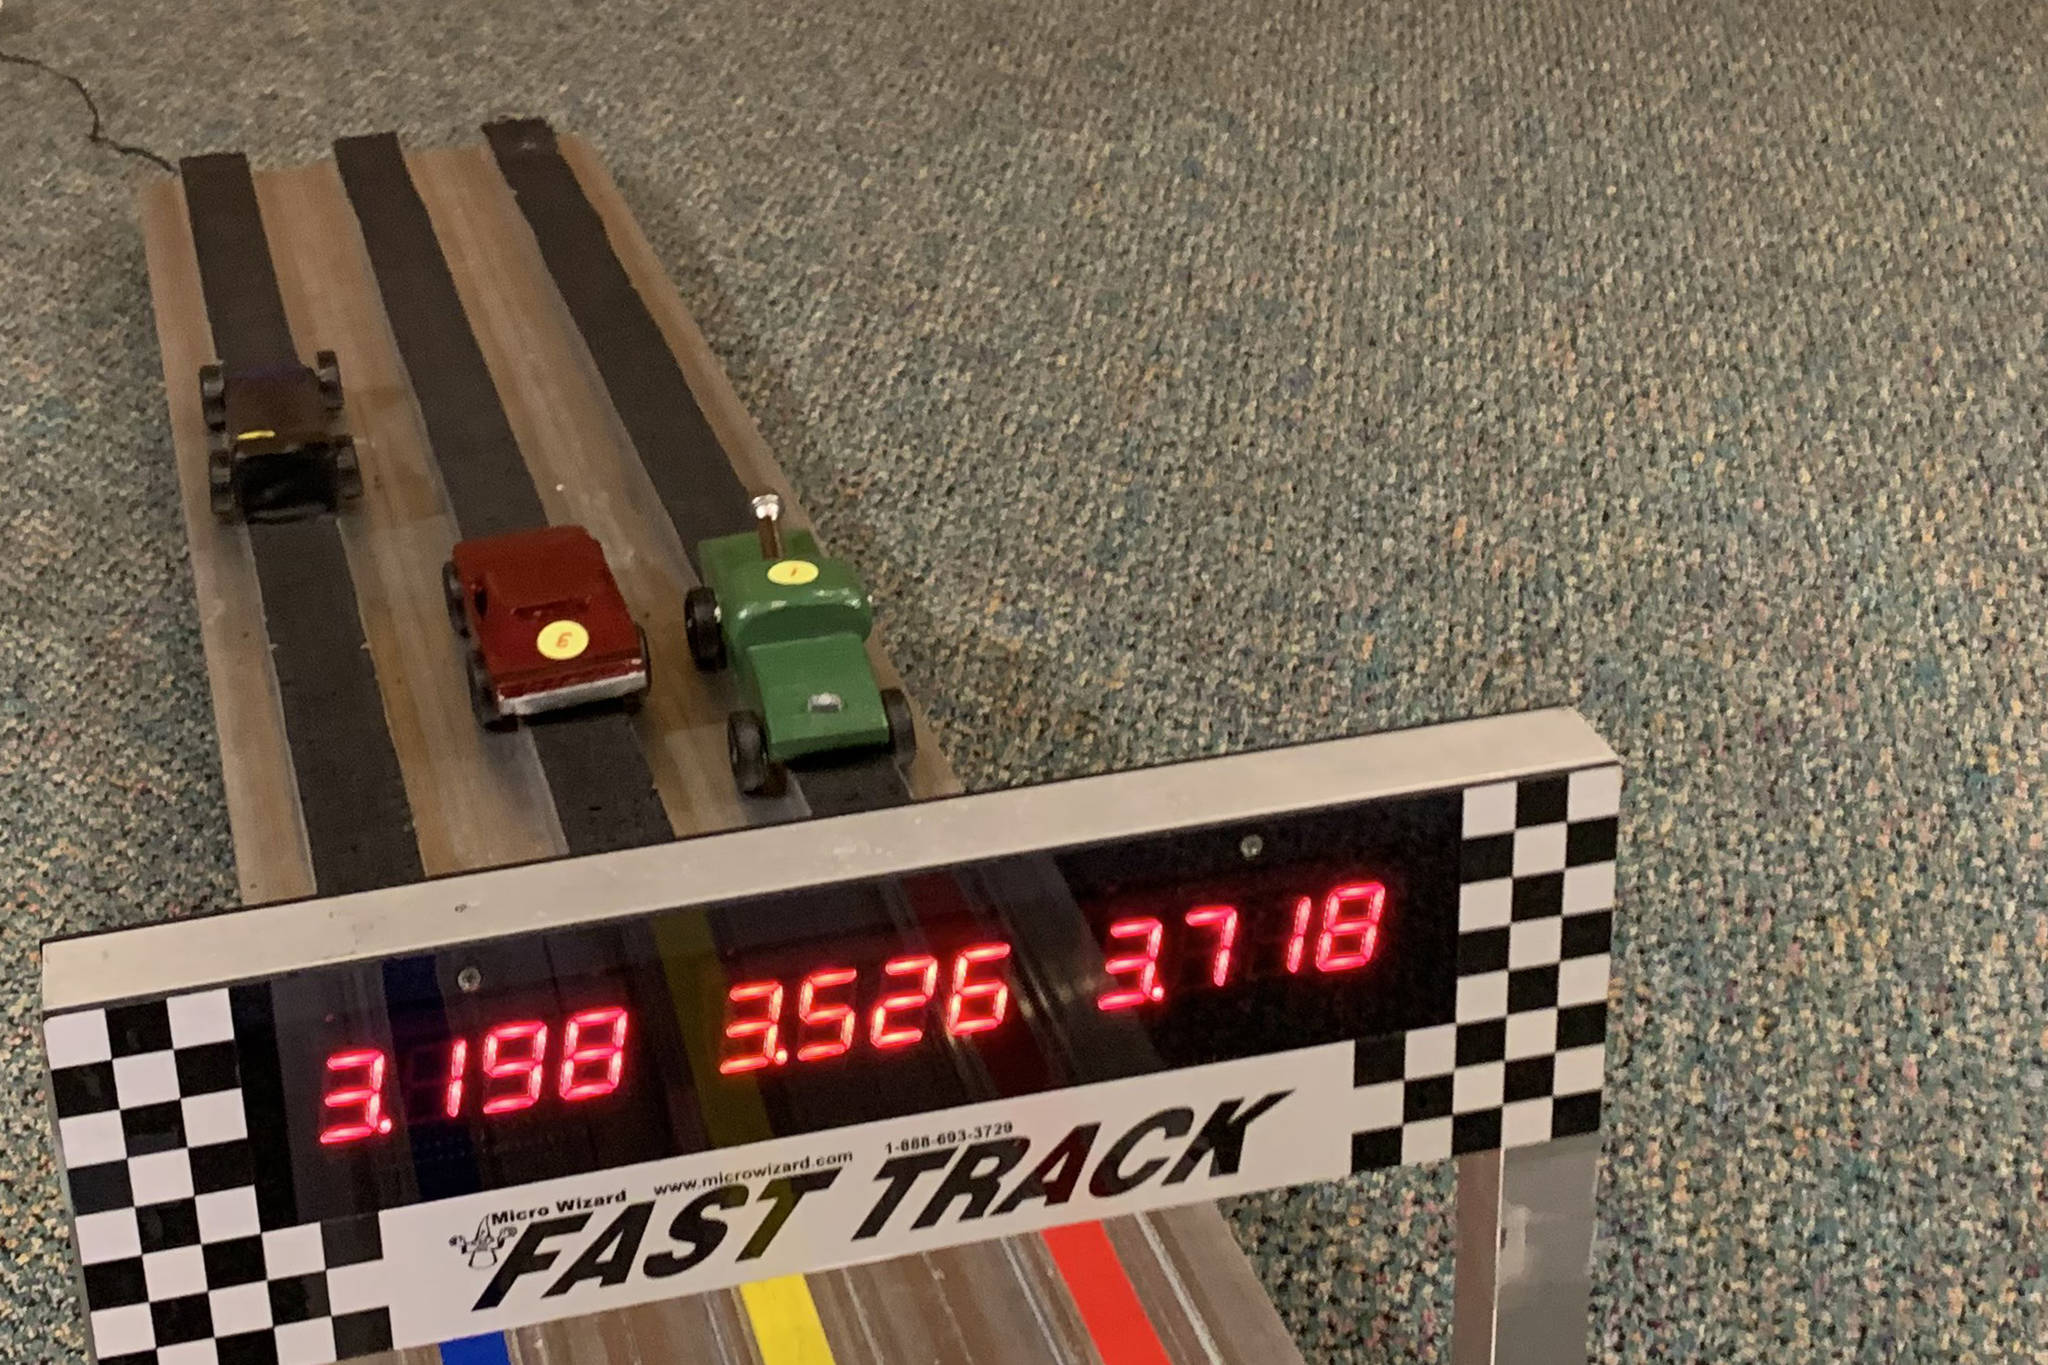 Cars zoom down the track at Saturday's Pinewood Derby. The COVID-19 pandemic forced the race to move a virtual format. (Dana Zigmund/Juneau Empire)